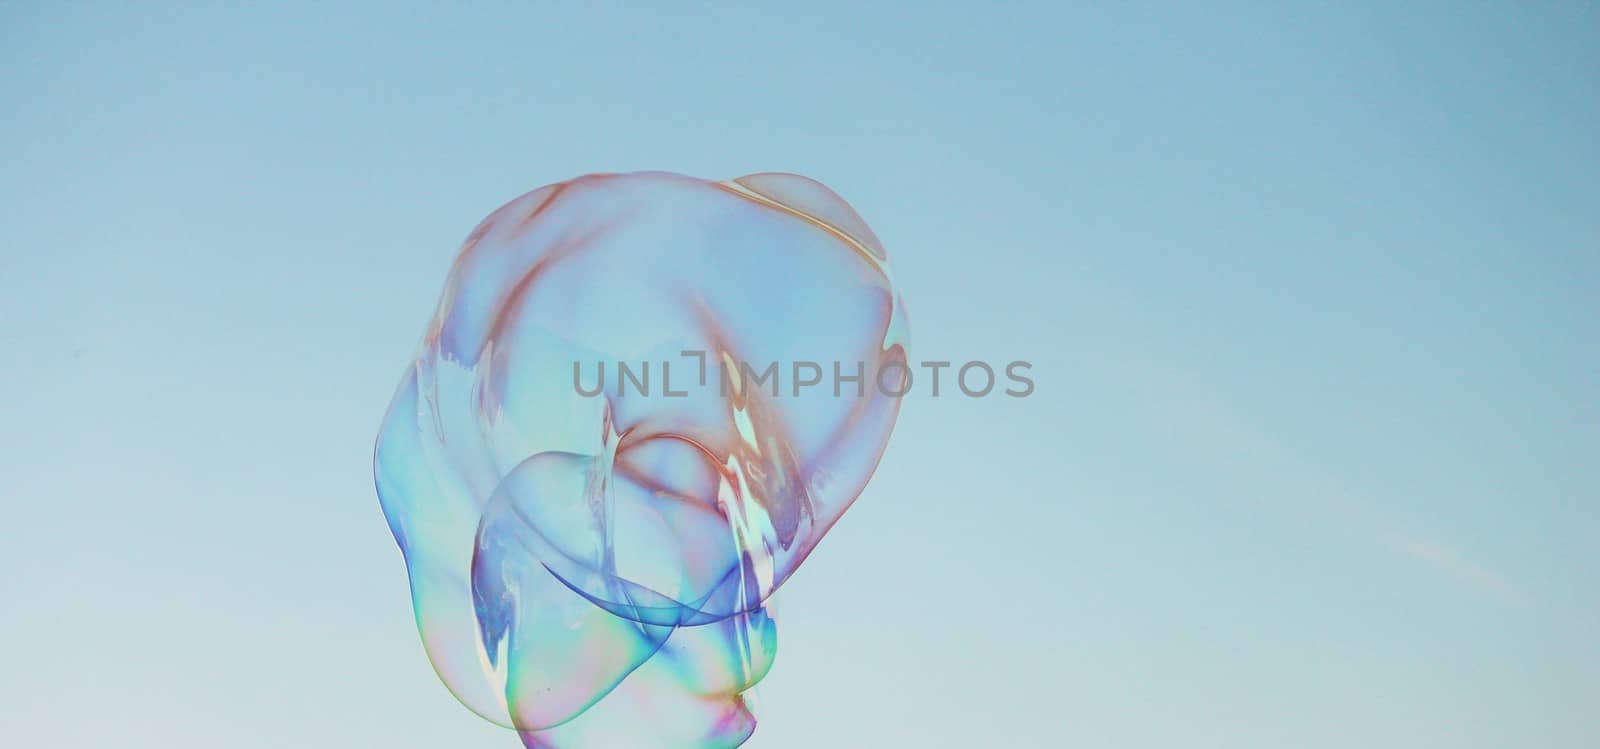 Soap bubbles on a blue sky illuminated by the sun by cheekylorns